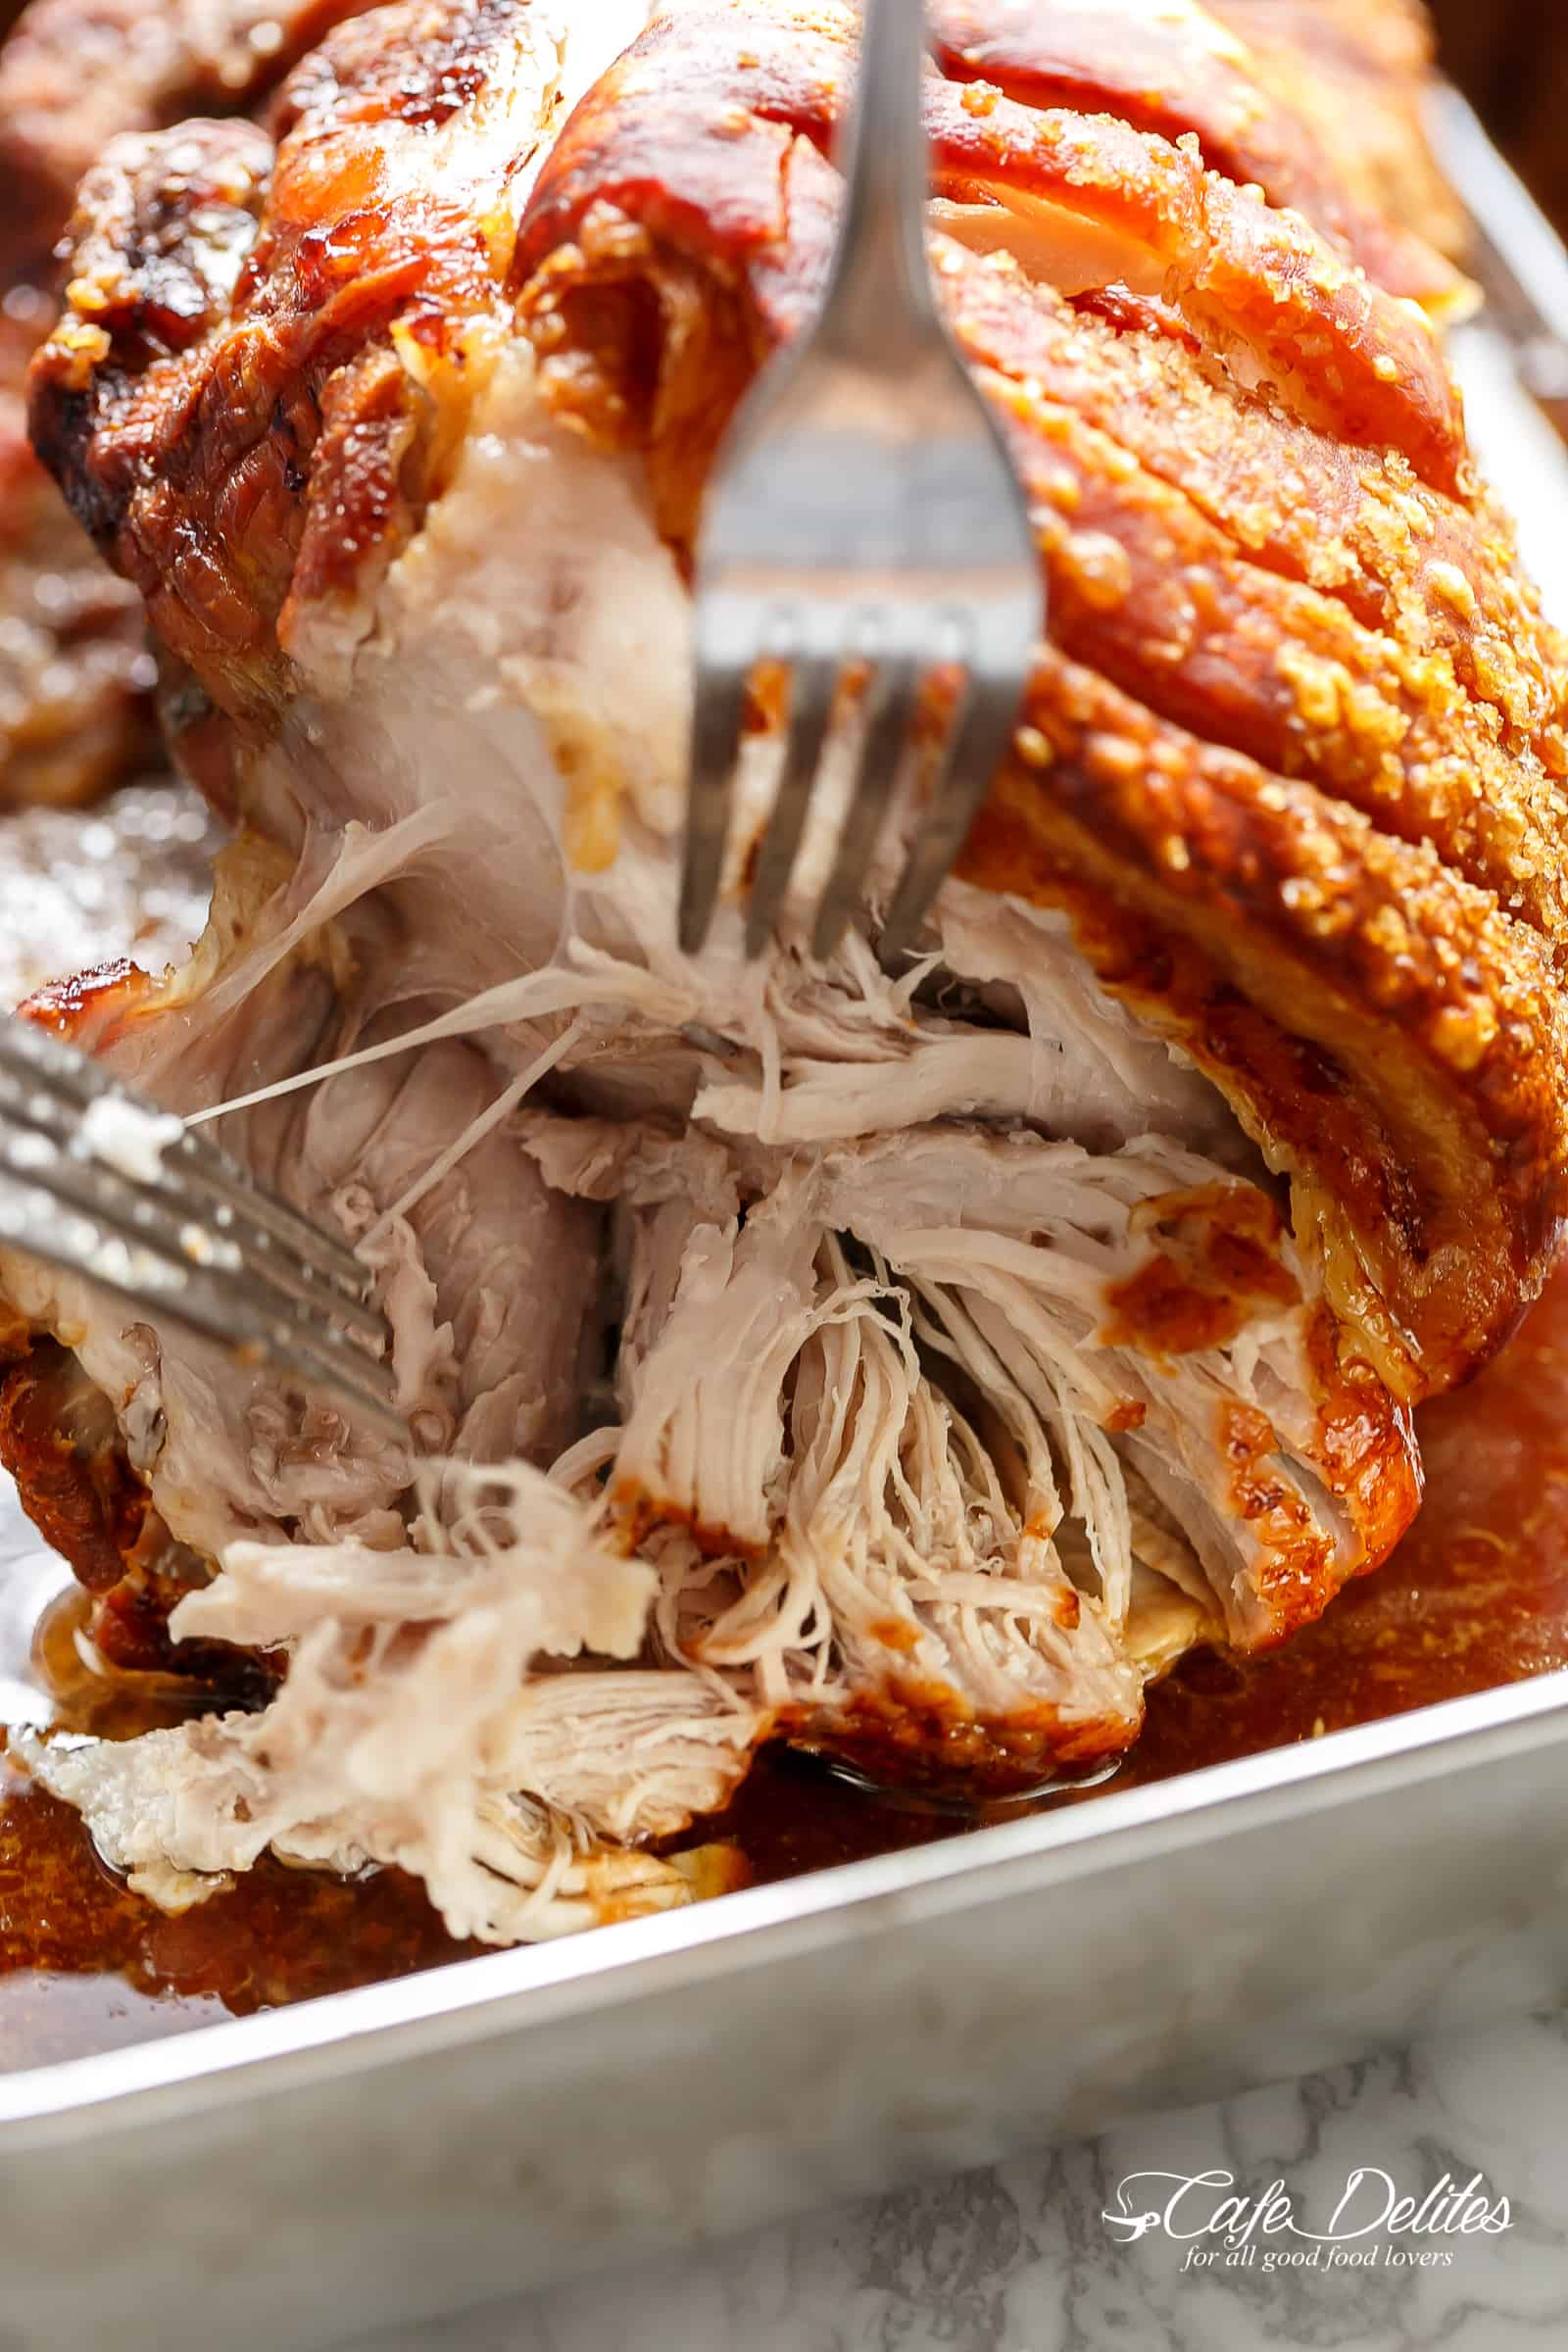 The Most Perfect Pork Roast With Crackling to hit your weekend or holiday table! Roasting a pork shoulder or butt is so easy, but to get the crackle makes it all the more worth every minute waiting! #pork #roast #sunday #easyrecipes #dinner | cafedelites.com